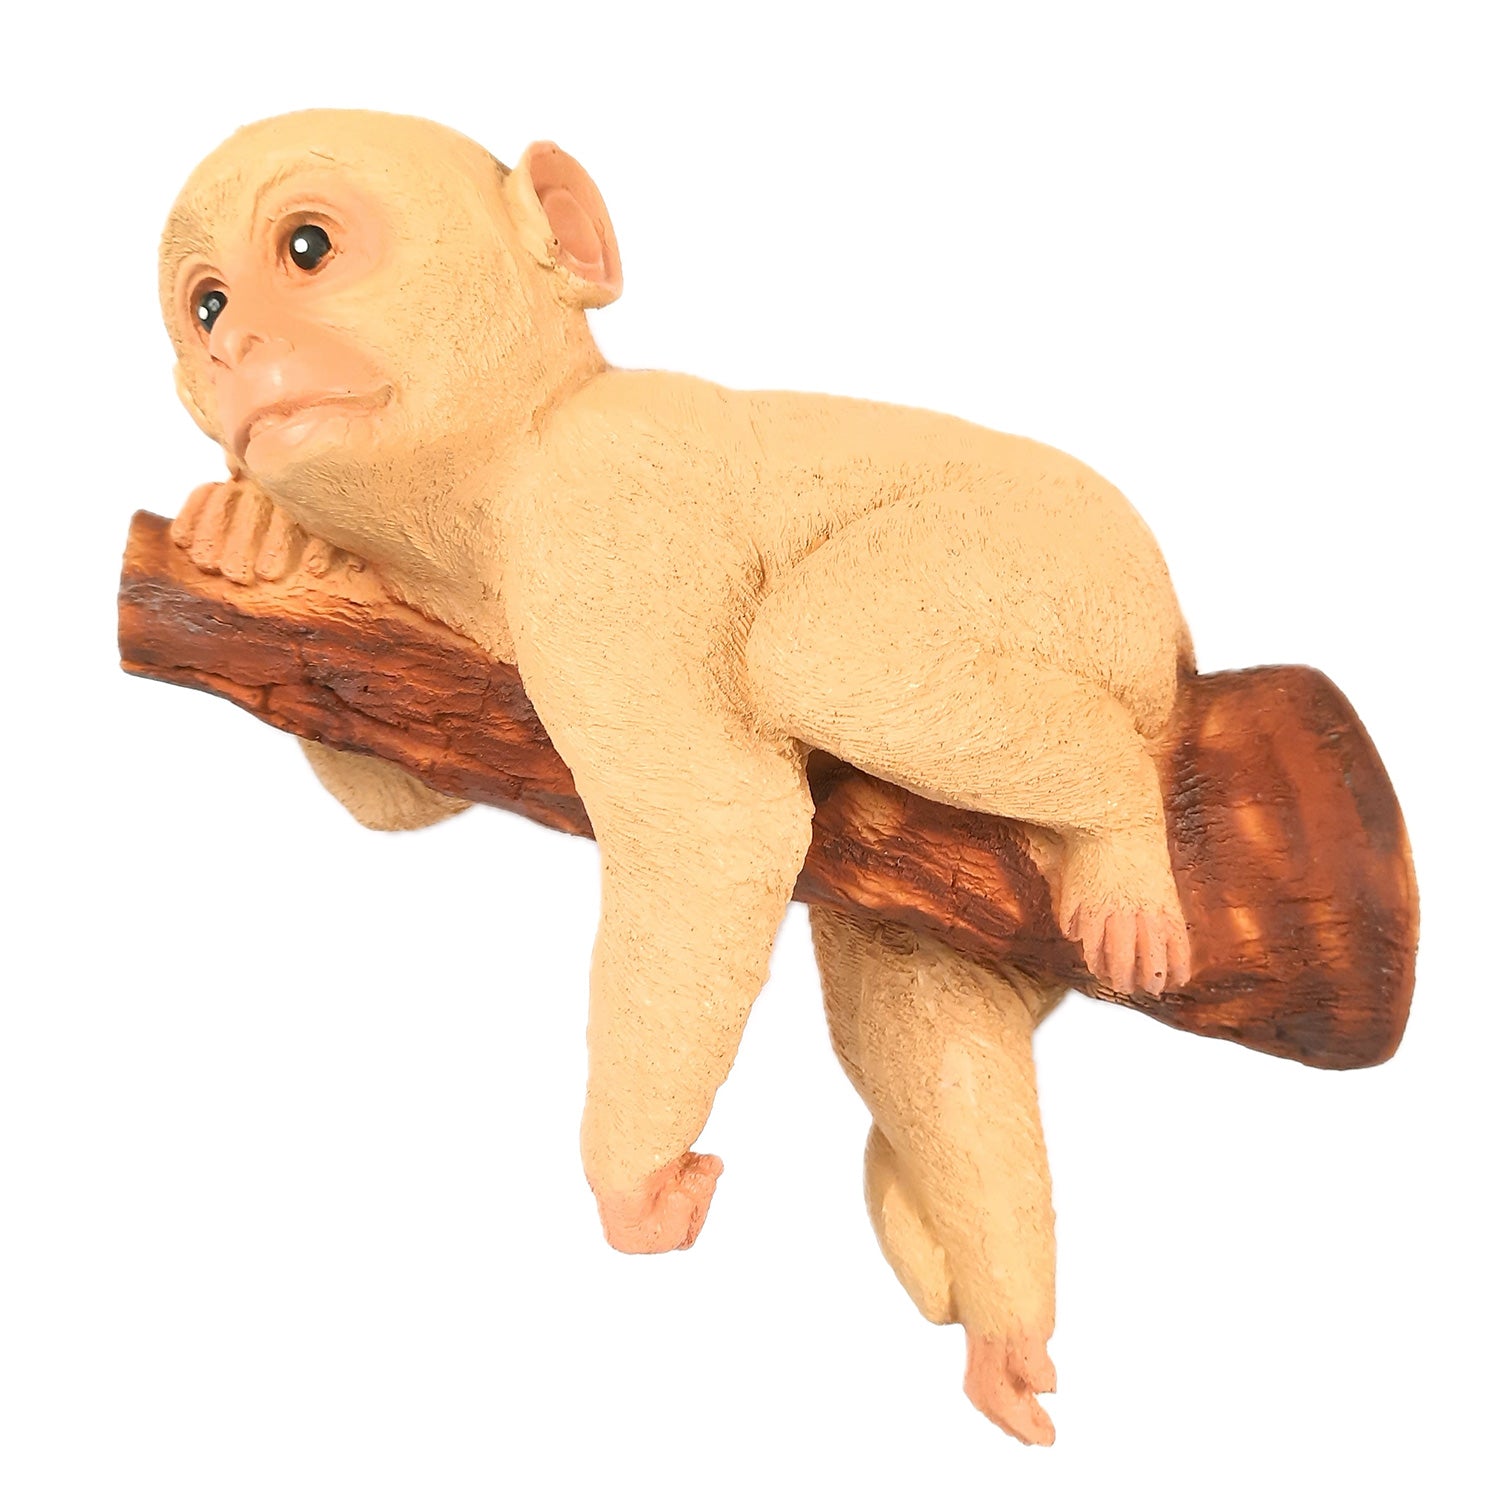 Monkey Hanging on Tree Branch Statue Wall Hanging | Animal Showpiece - For Garden Decor, Home, Living Room, Kids Room & Gifts - 12 Inch - Apkamart